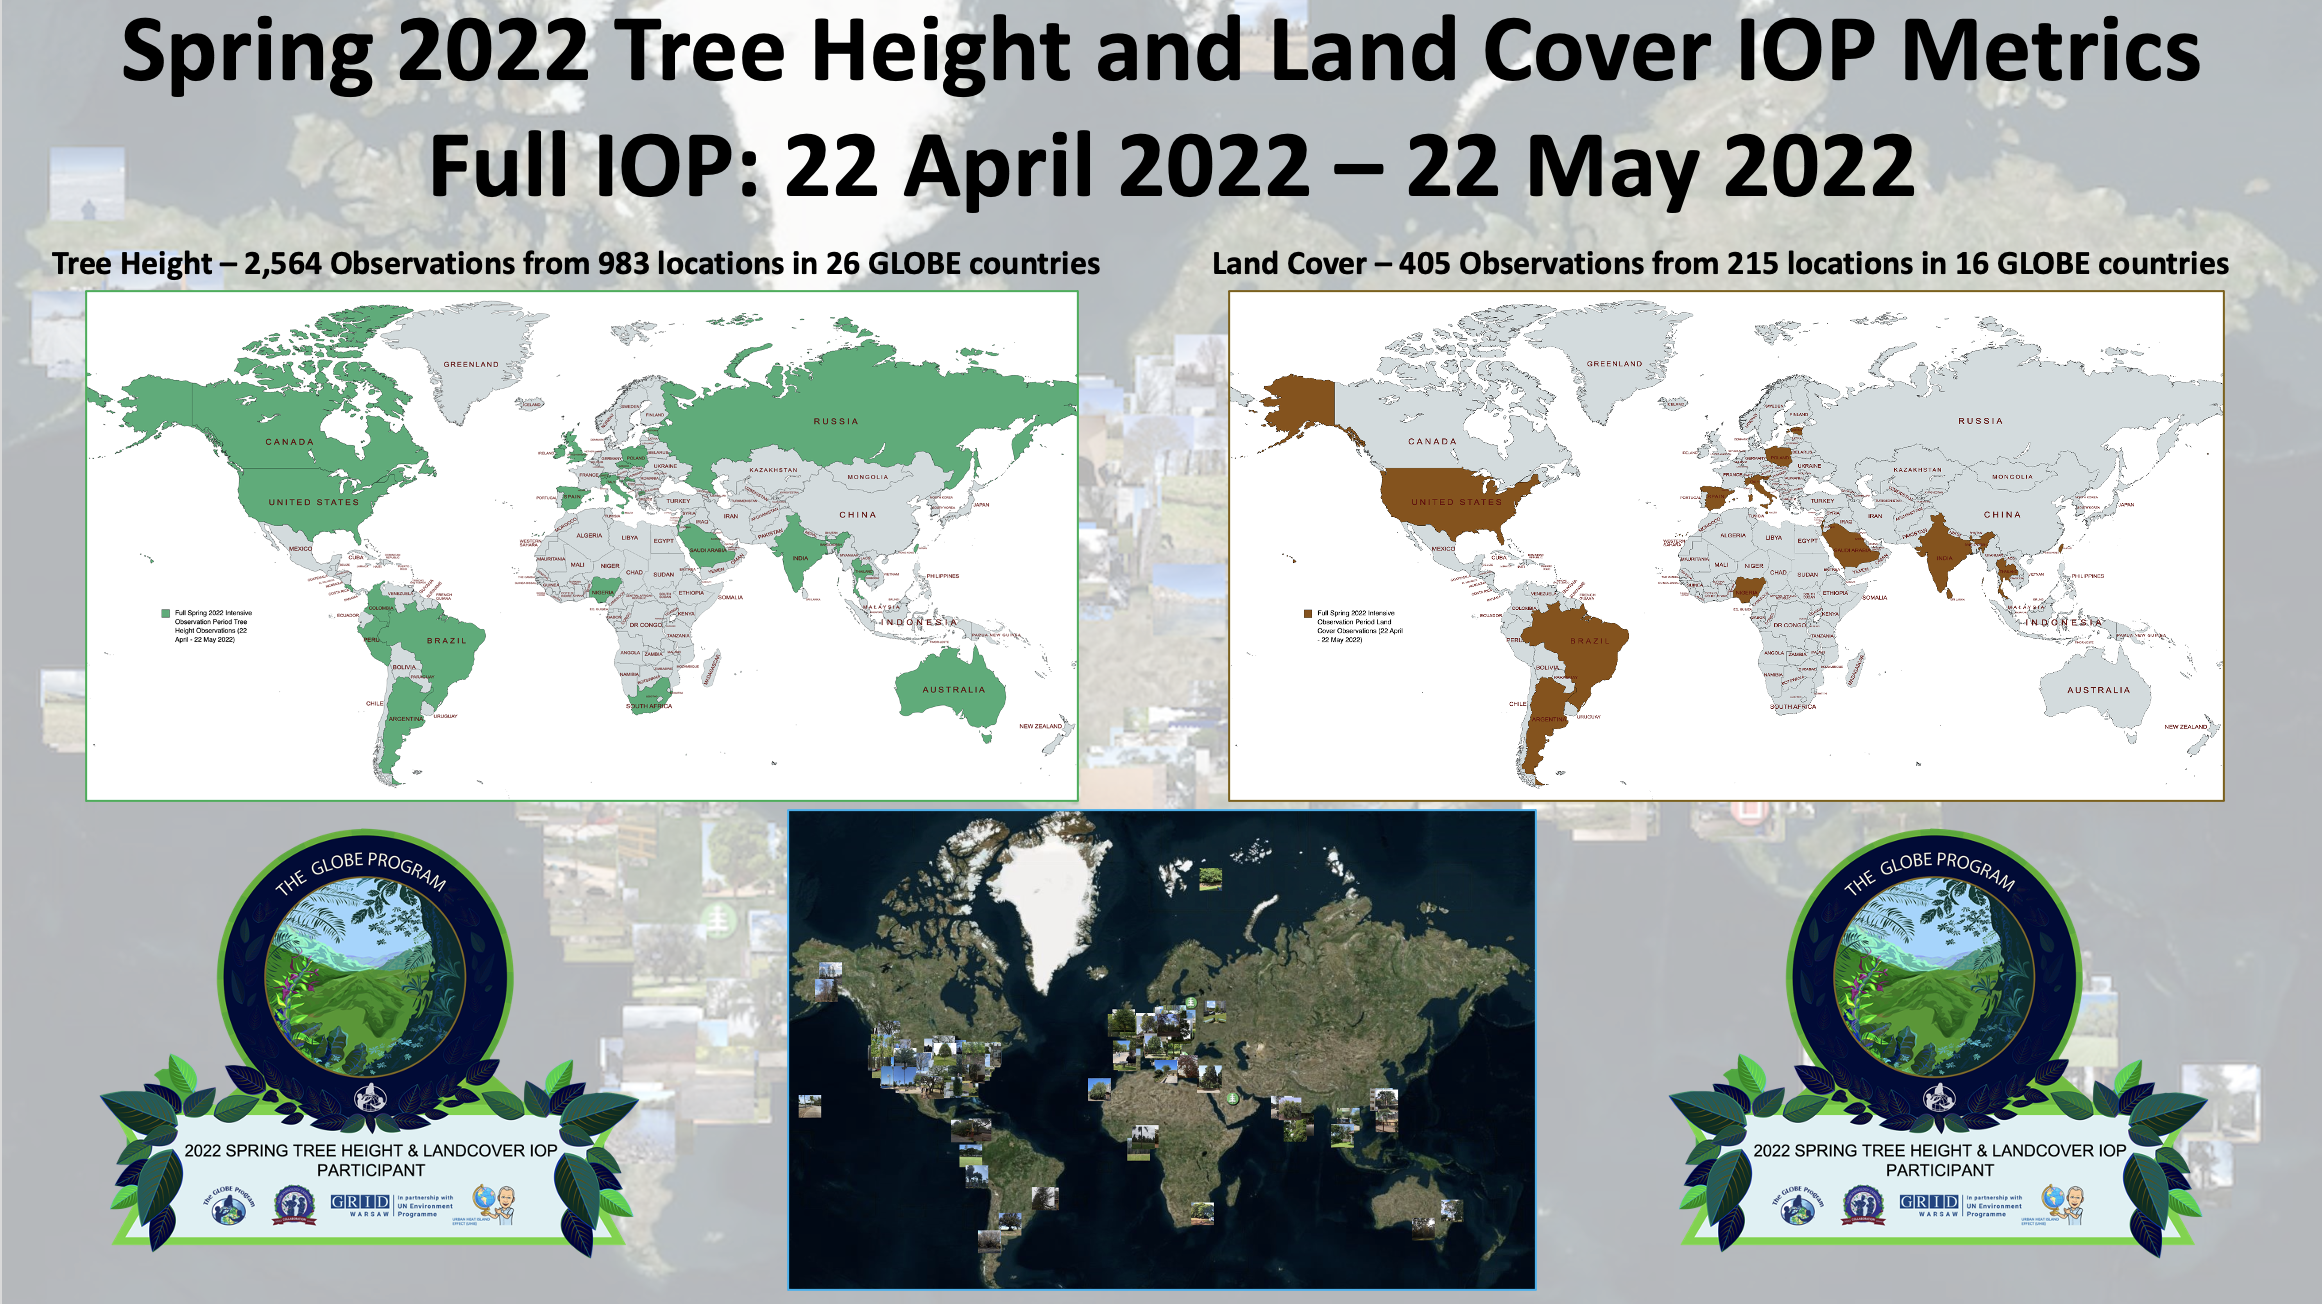 Spring 2022 Tree Height and Land Cover IOP Metrics charts, showing the number of observations